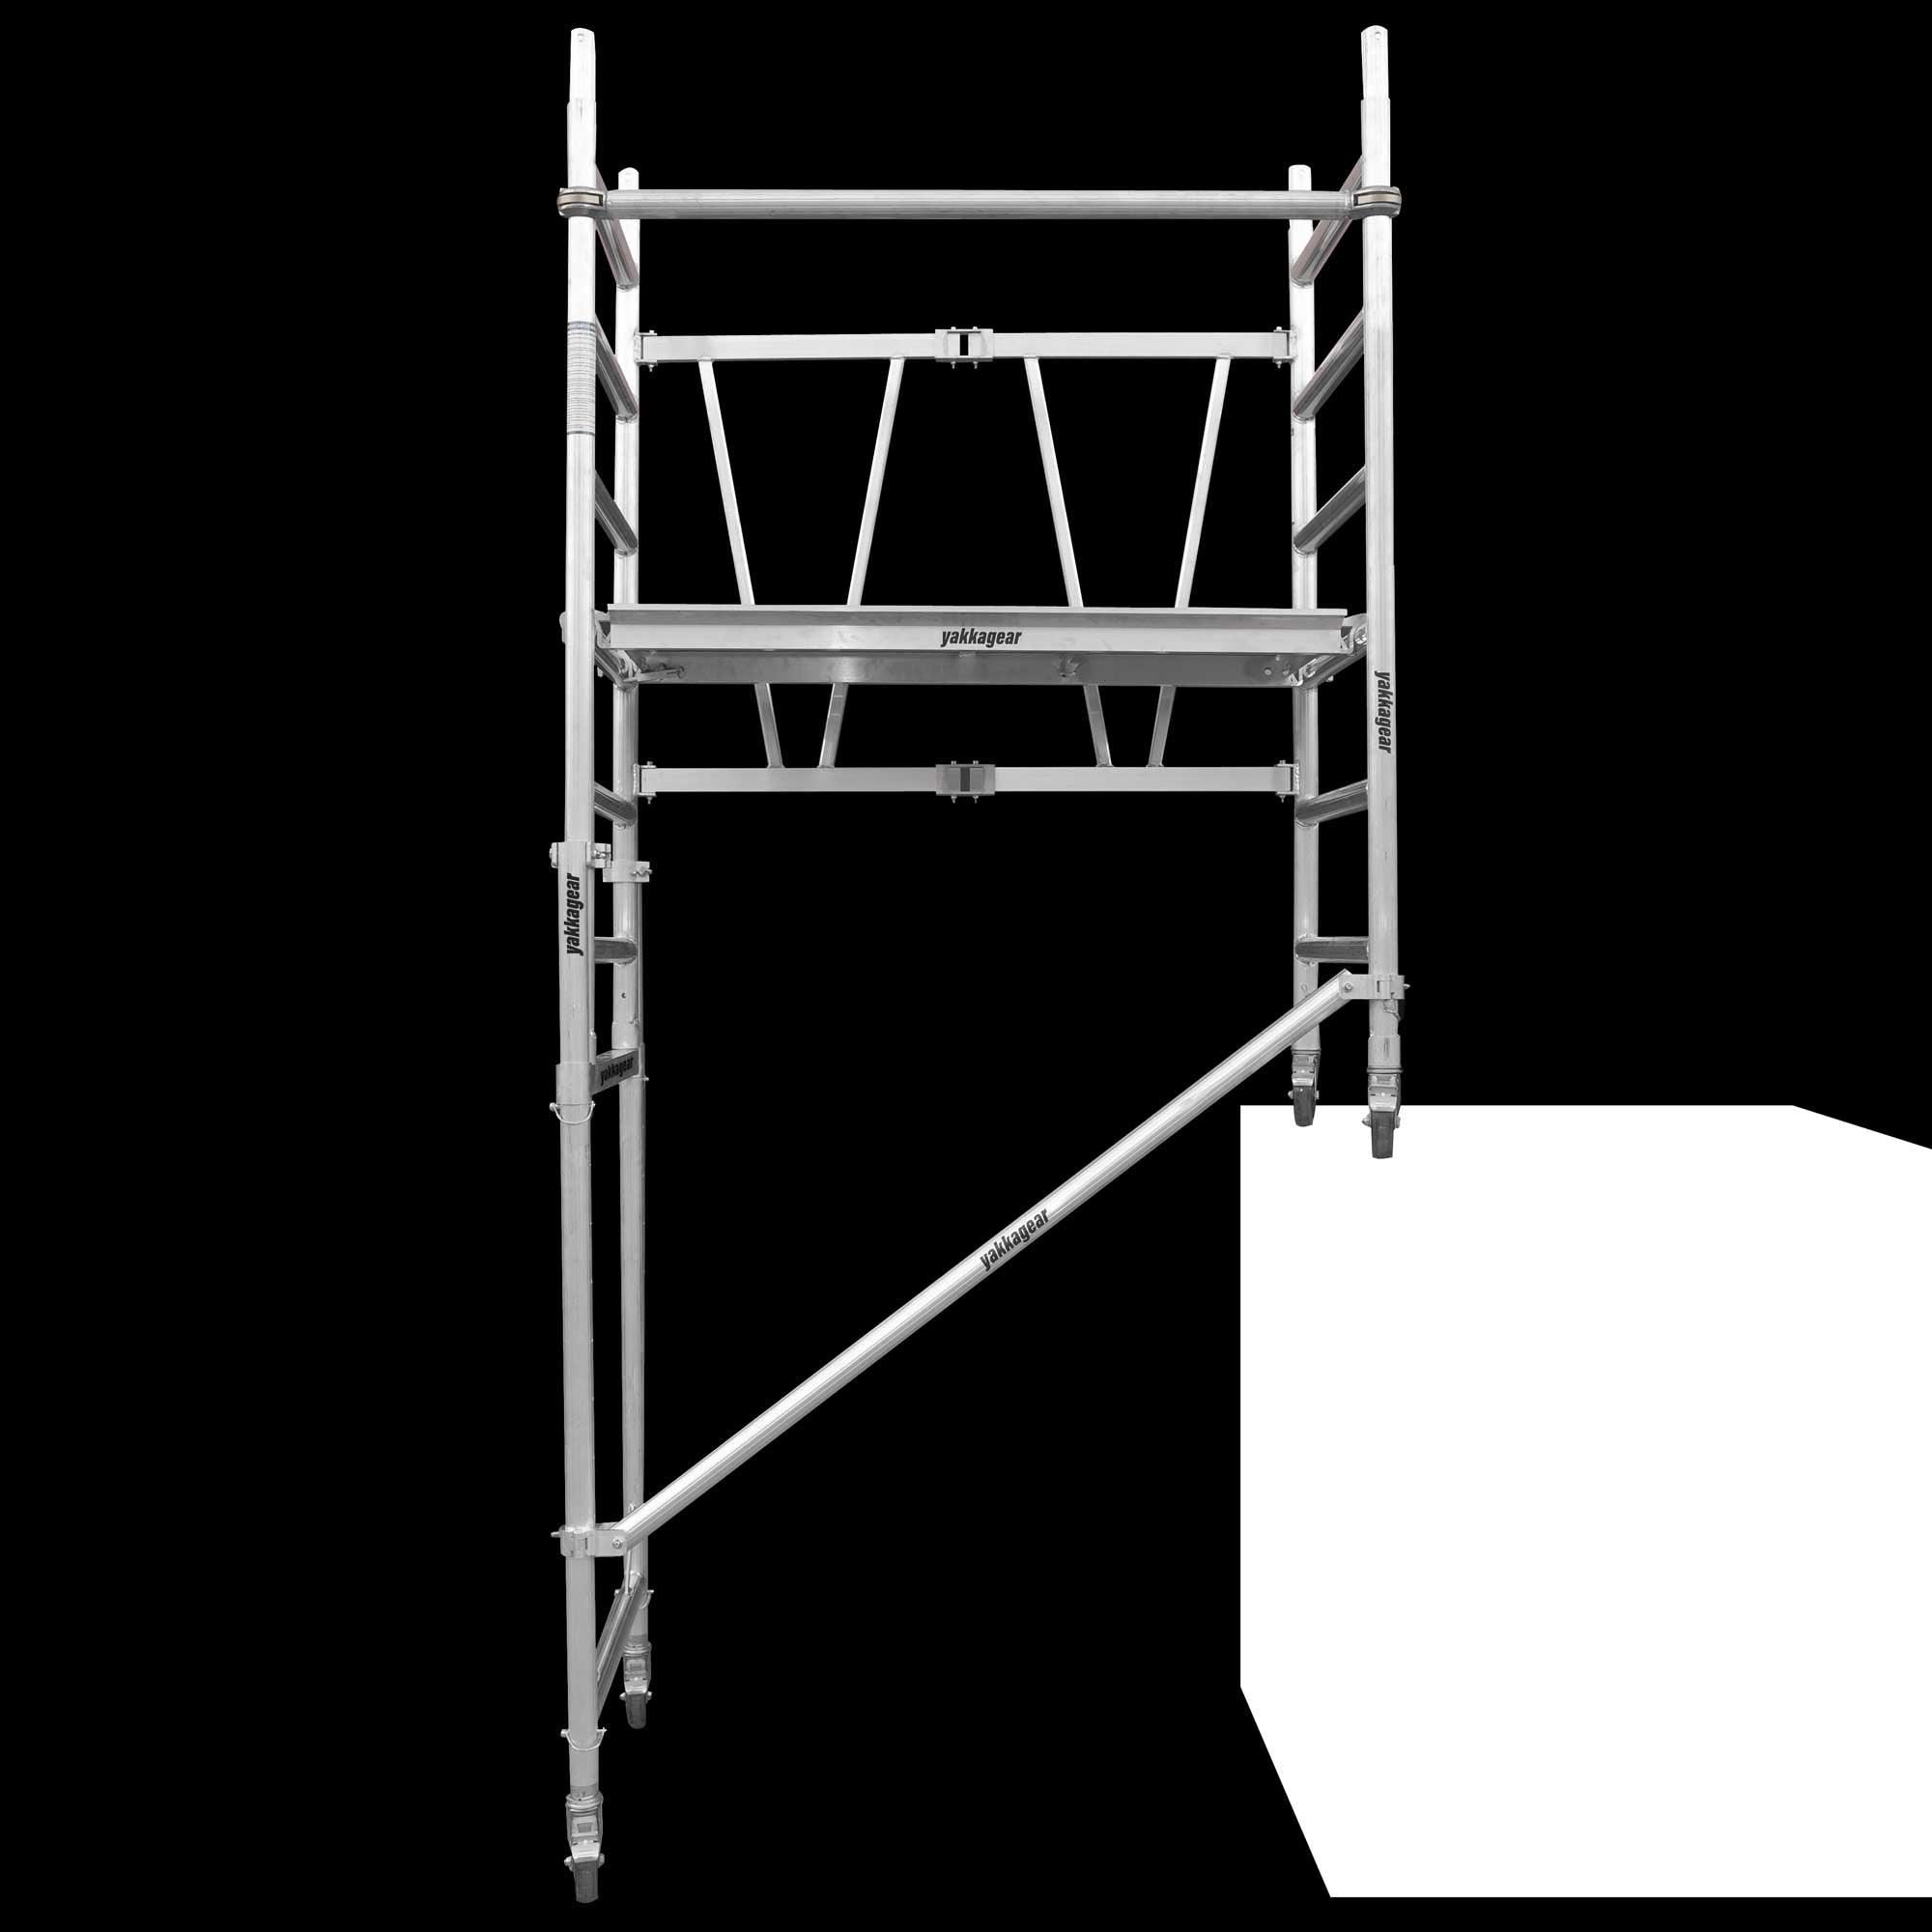 Yakka Gear Australia Adjustable Stairs toolkit used on 1.44m Length x 0.74m Width compact scaffolding tower as access equipment, with working platform heights ranging from 1.2m to 3.9m and reach between 3.25m to 6m, zoomed in detailed view of the stairs toolkit with the rest of the scaffold greyed out example used on a big block step, with black background. 